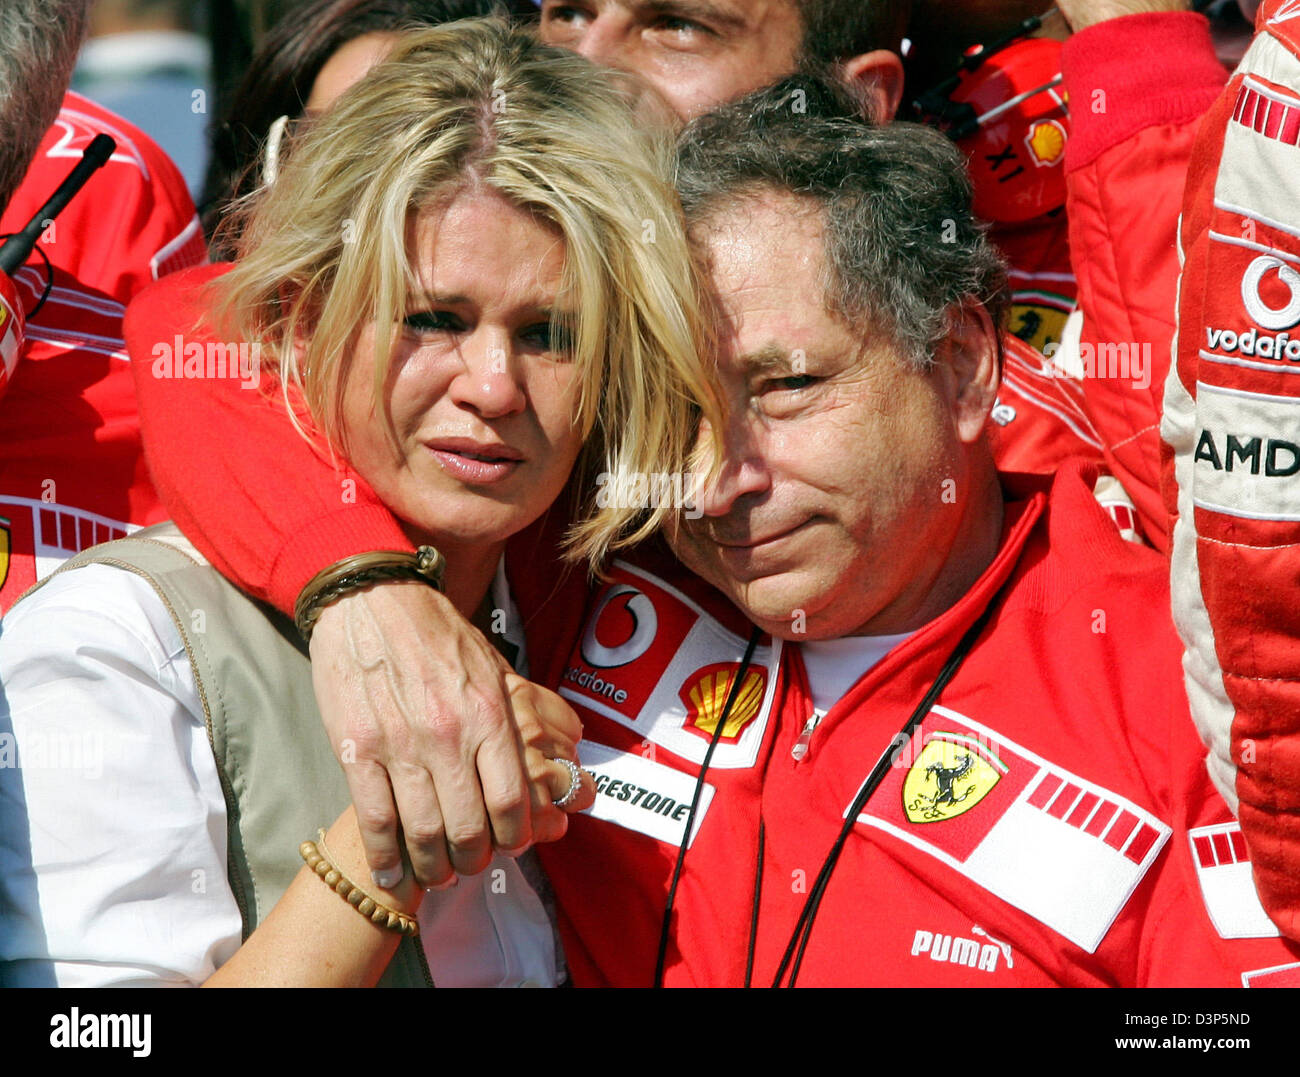 Page 2 - Jean Todt High Resolution Stock Photography and Images - Alamy